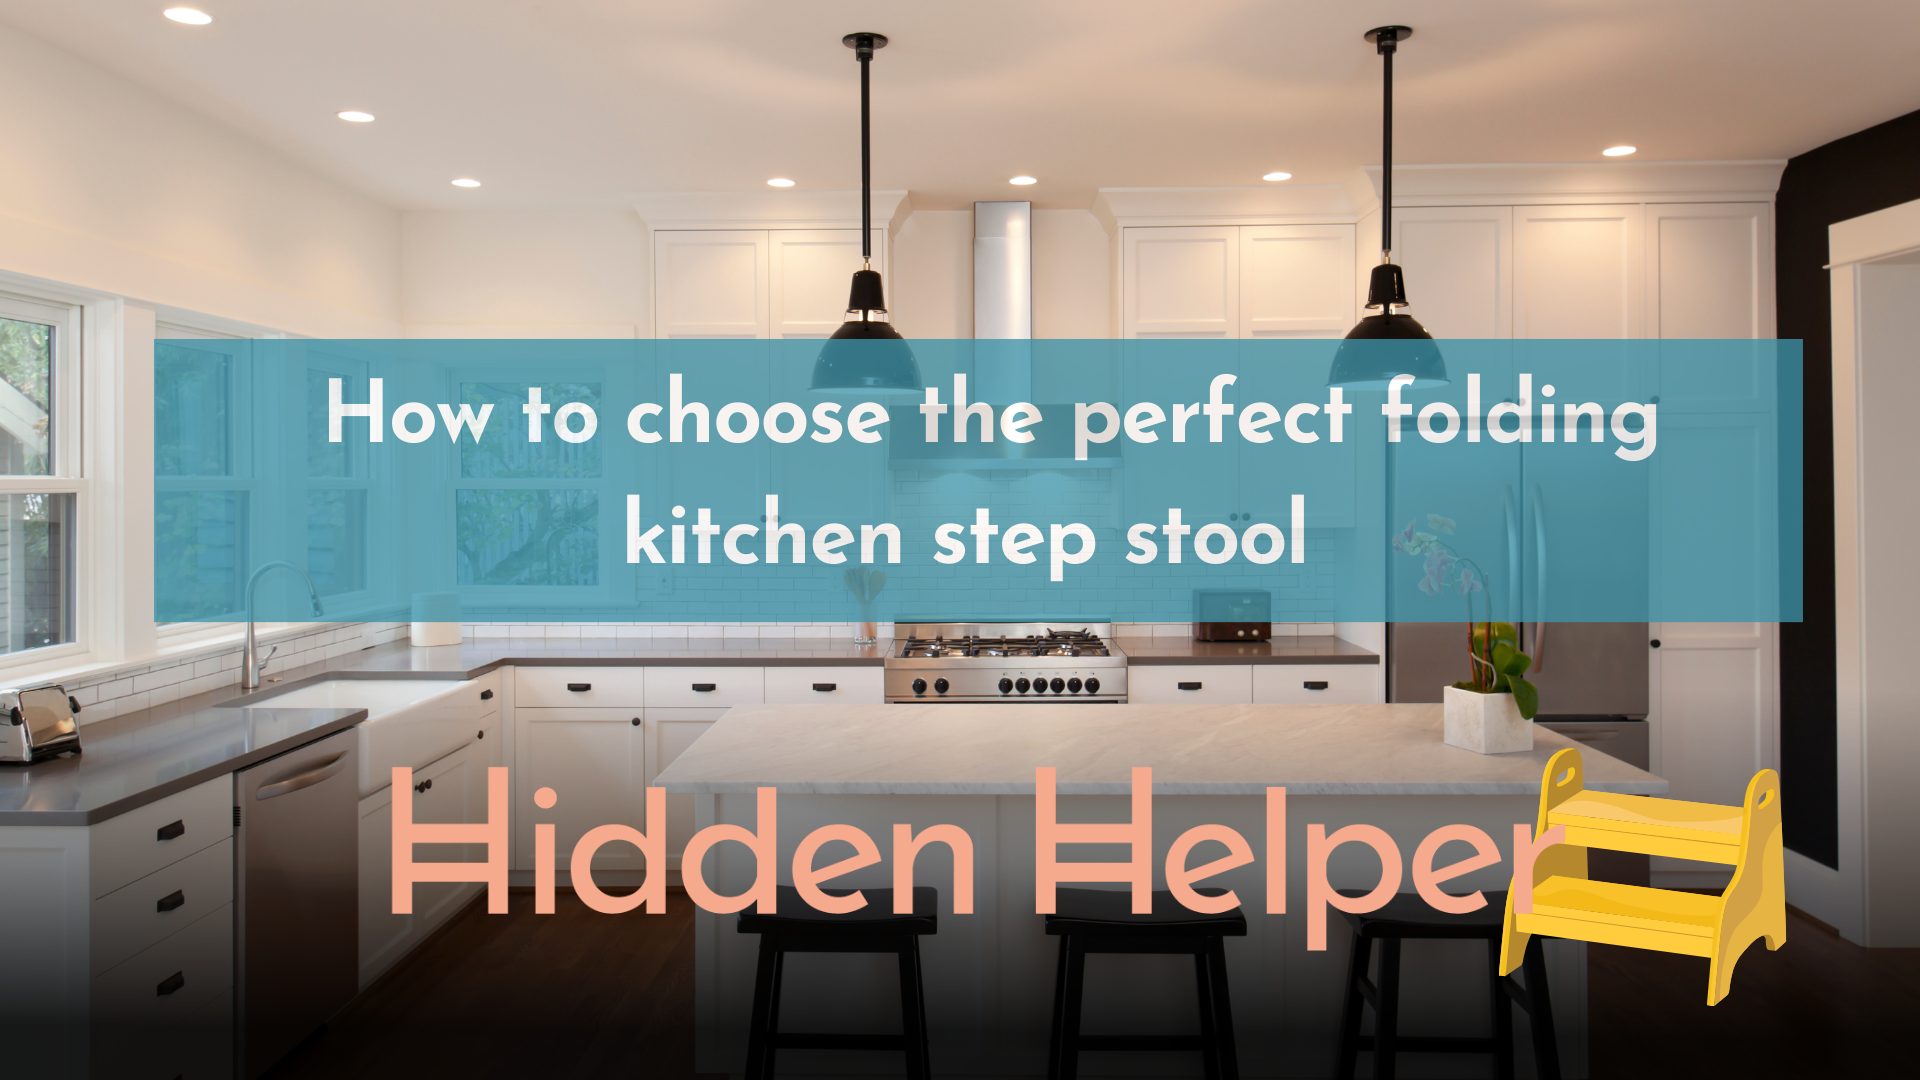  How to choose the perfect folding kitchen step stool